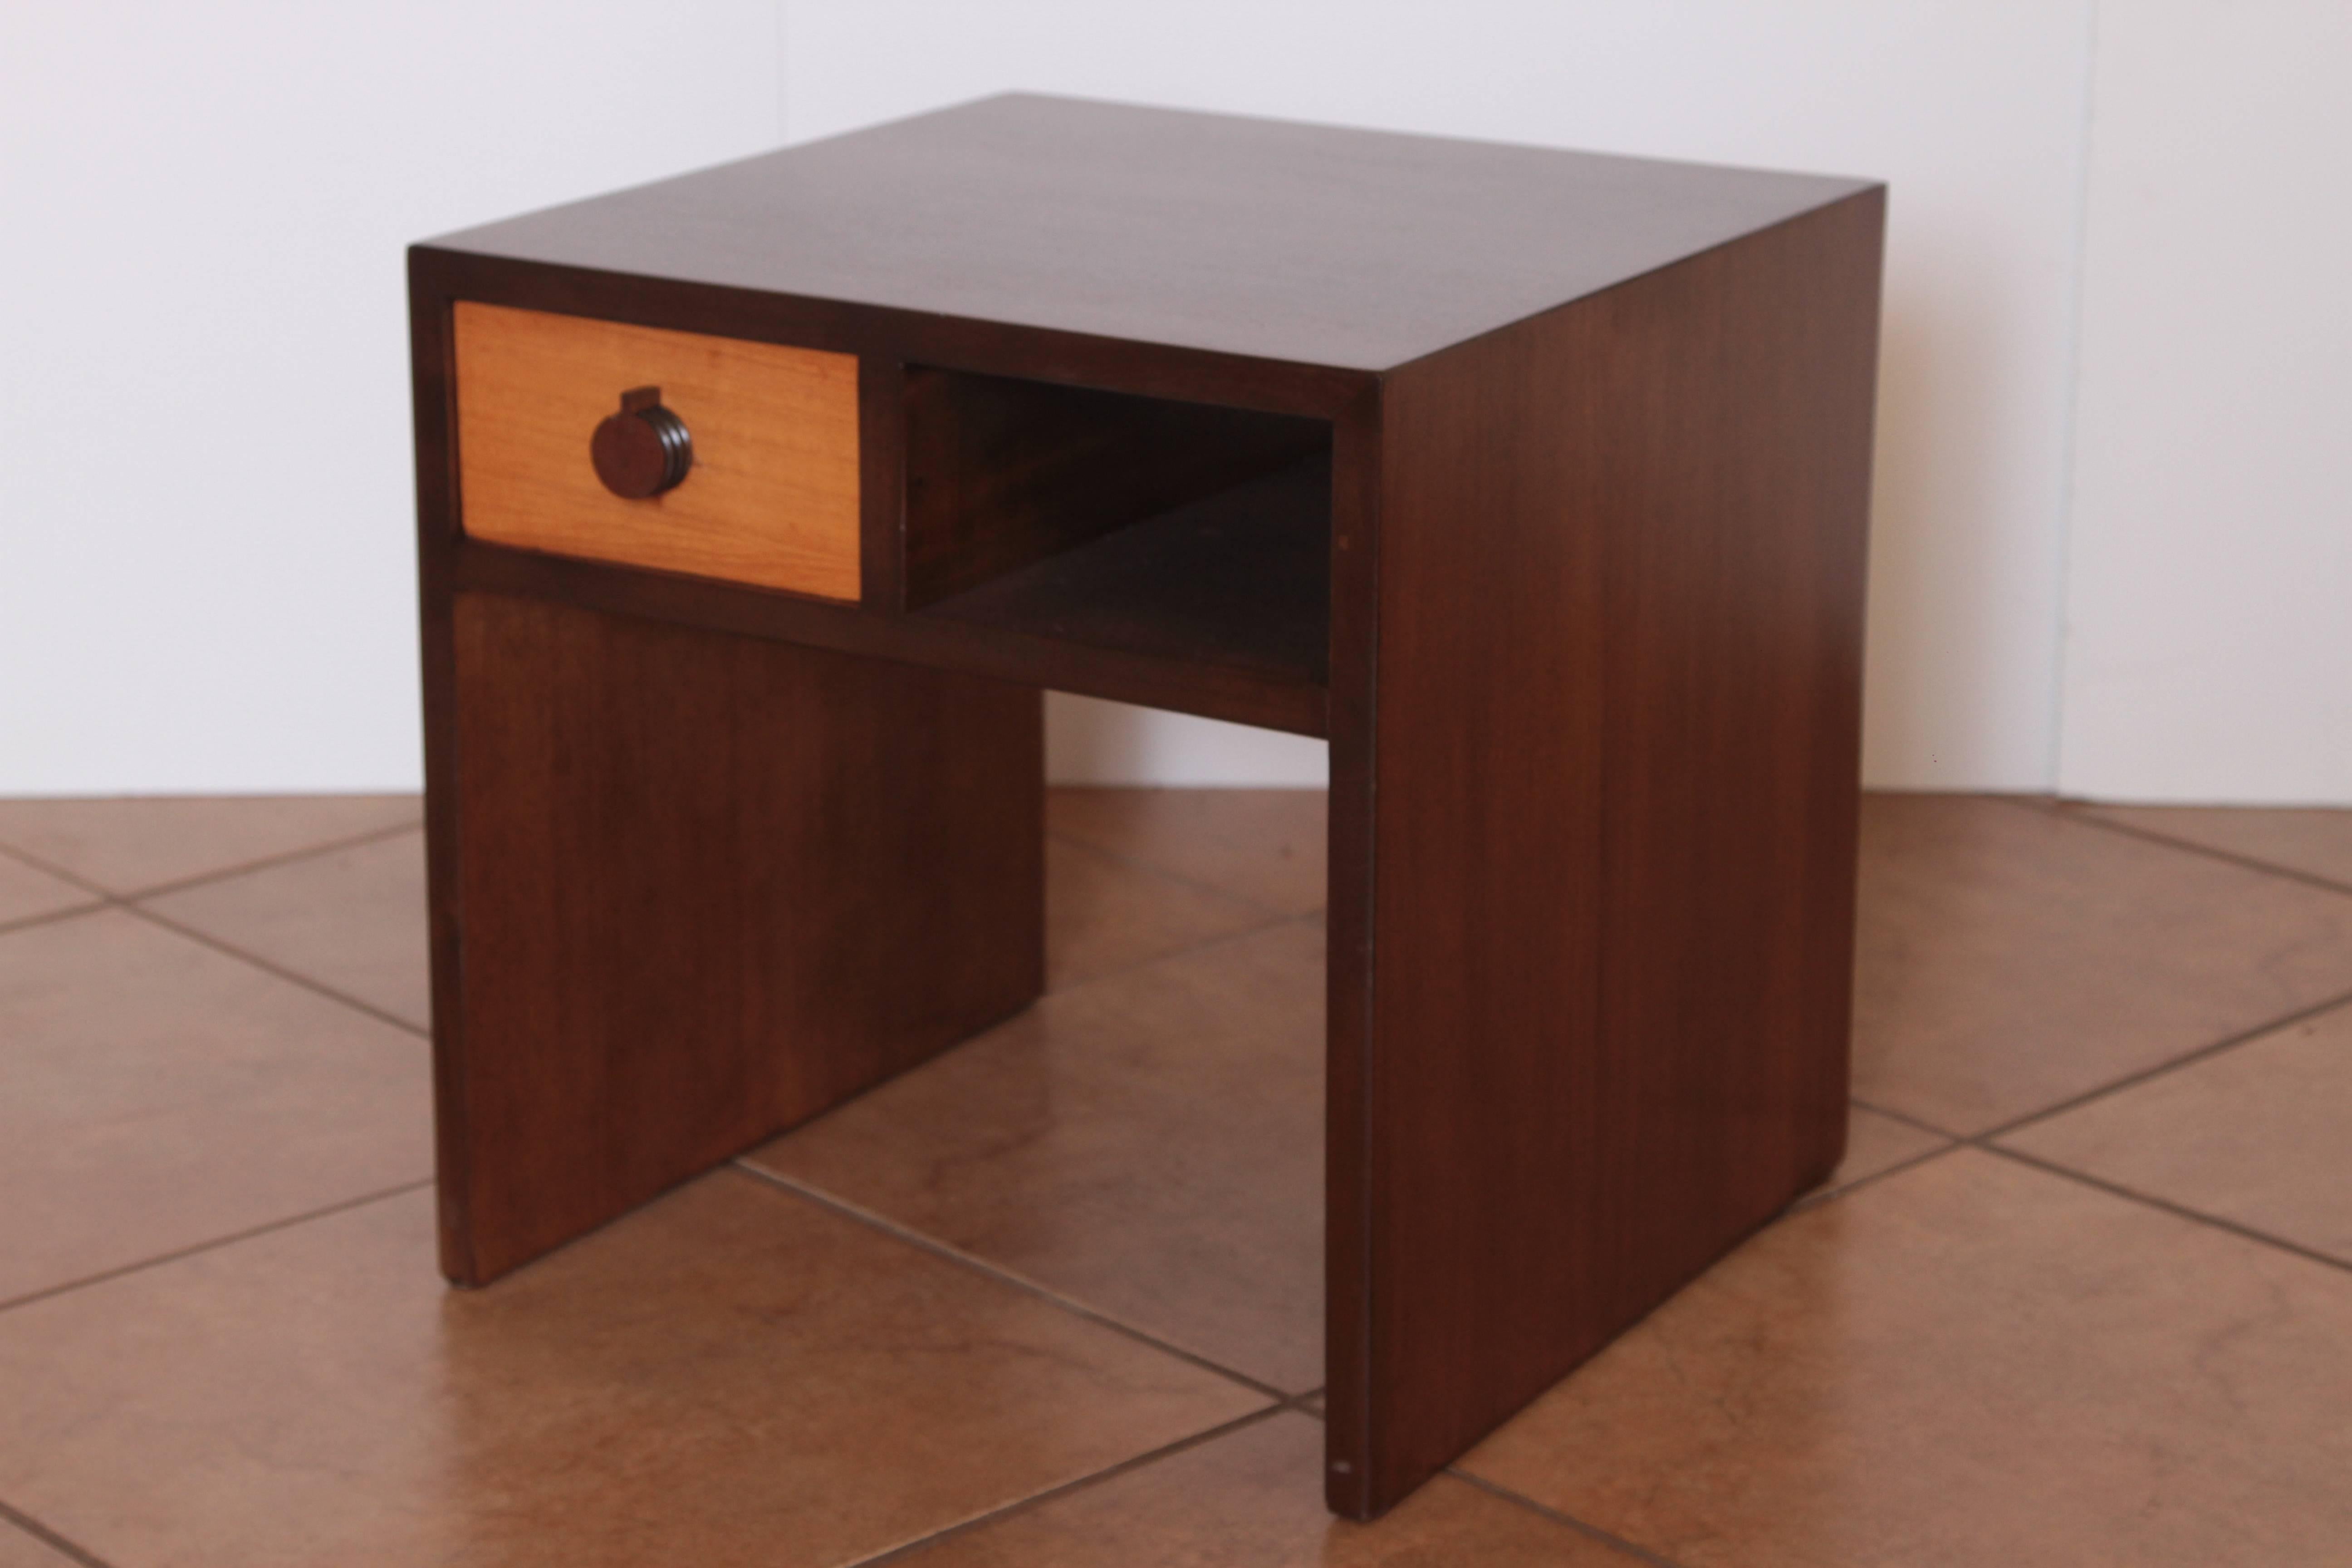 Art Deco Gilbert Rohde for Herman Miller Mansonia group occasional table.
Side table, end table, nightstand, bookcase.

Versatile compact squared rectilinear Rohde design for Mansonia (African Walnut) Group, introduced by Herman Miller in